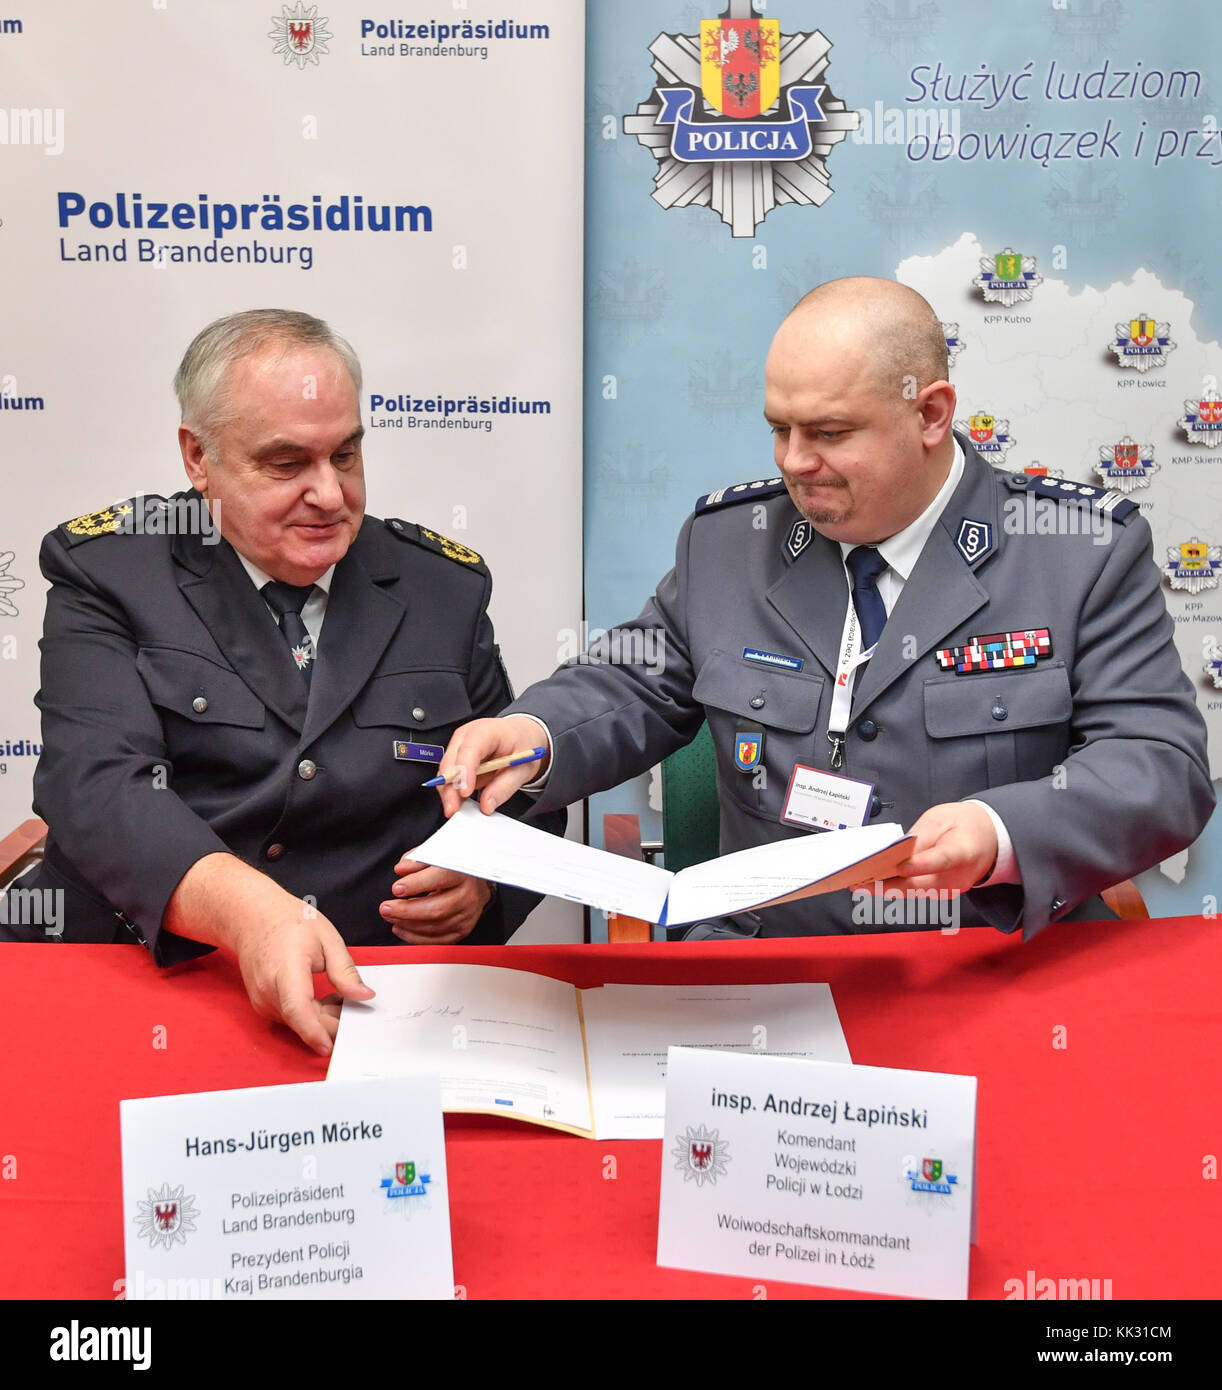 Kostrzyn, Poland. 29th Nov, 2017. The police president of the federal state Brandenburg, Hans-Juergen Moerke (L), and the voivodeship commander, Andrzej Lapinski from the Lodz police, sign a contract for the prevention of cyber criminality in Kostrzyn, Poland, 29 November 2017. The police headquarters of the federal state Brandenburg and the voivodeship Gorzow police are taking part in the joint border symposium 2017 under the motto 'collaboration without borders'. Credit: Patrick Pleul/dpa-Zentralbild/dpa/Alamy Live News Stock Photo